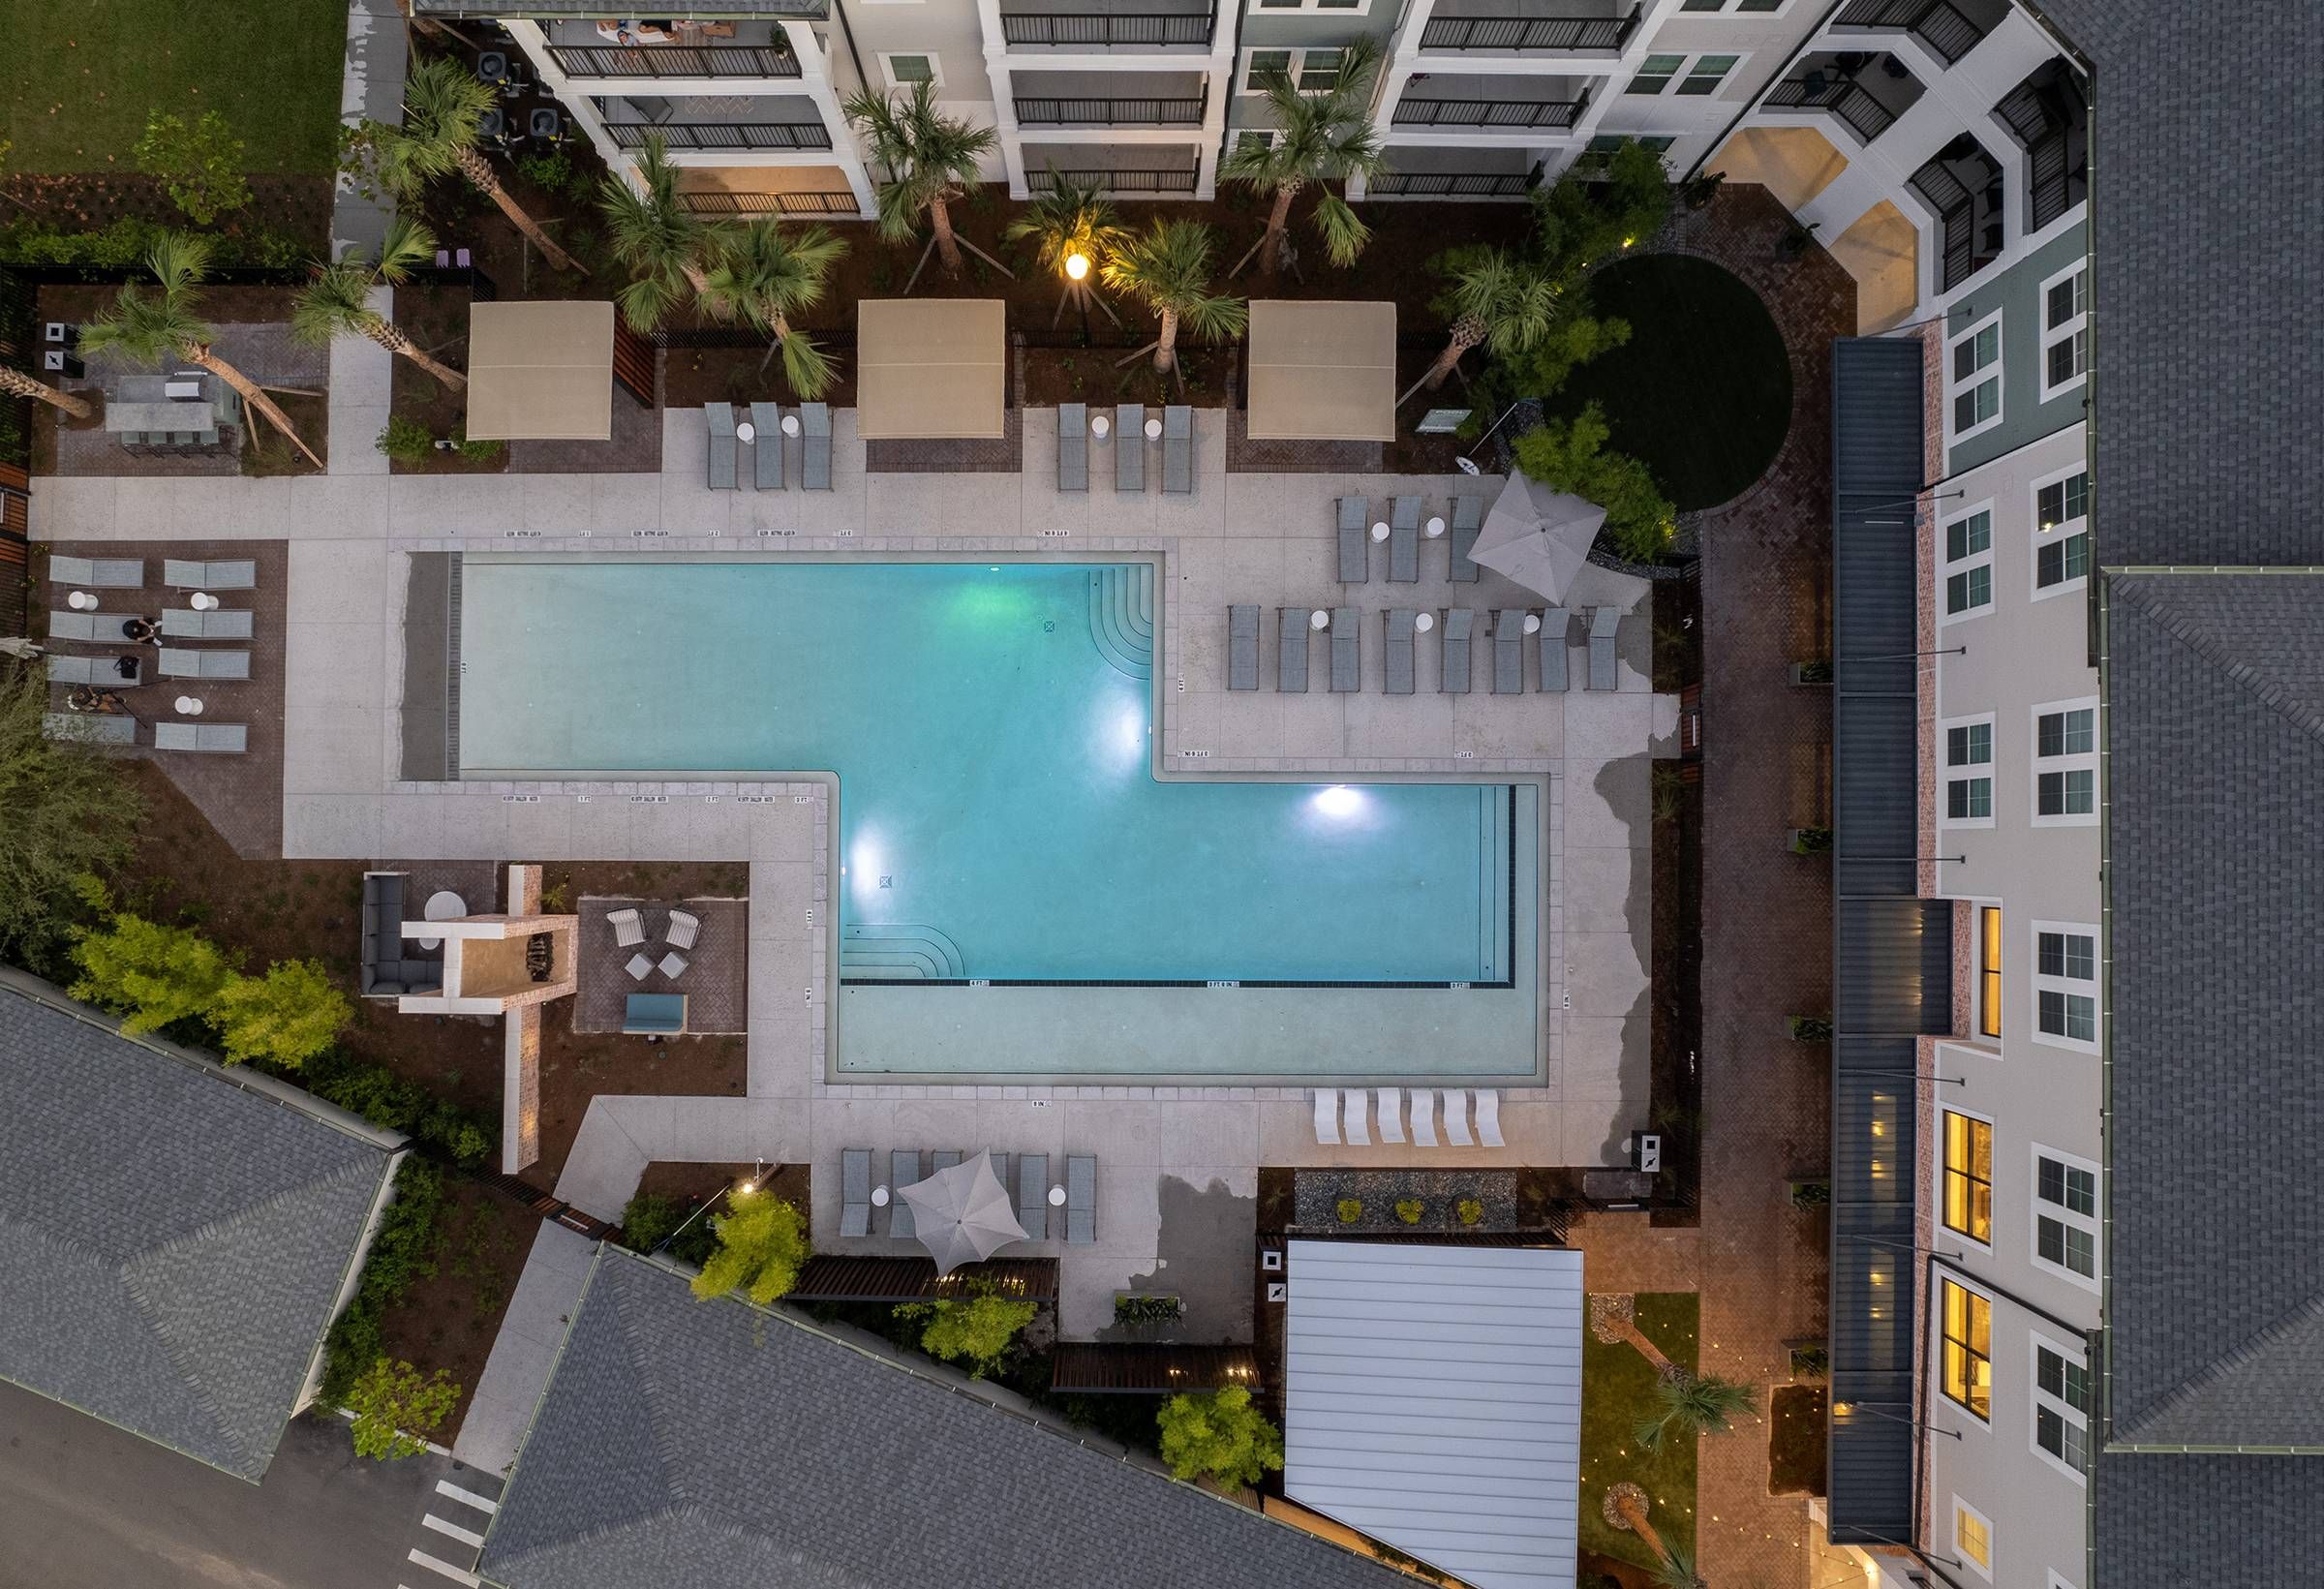 Evening aerial view of Alta Winter Garden's pool deck with glowing lights, showcasing a tranquil pool surrounded by loungers and palm trees.